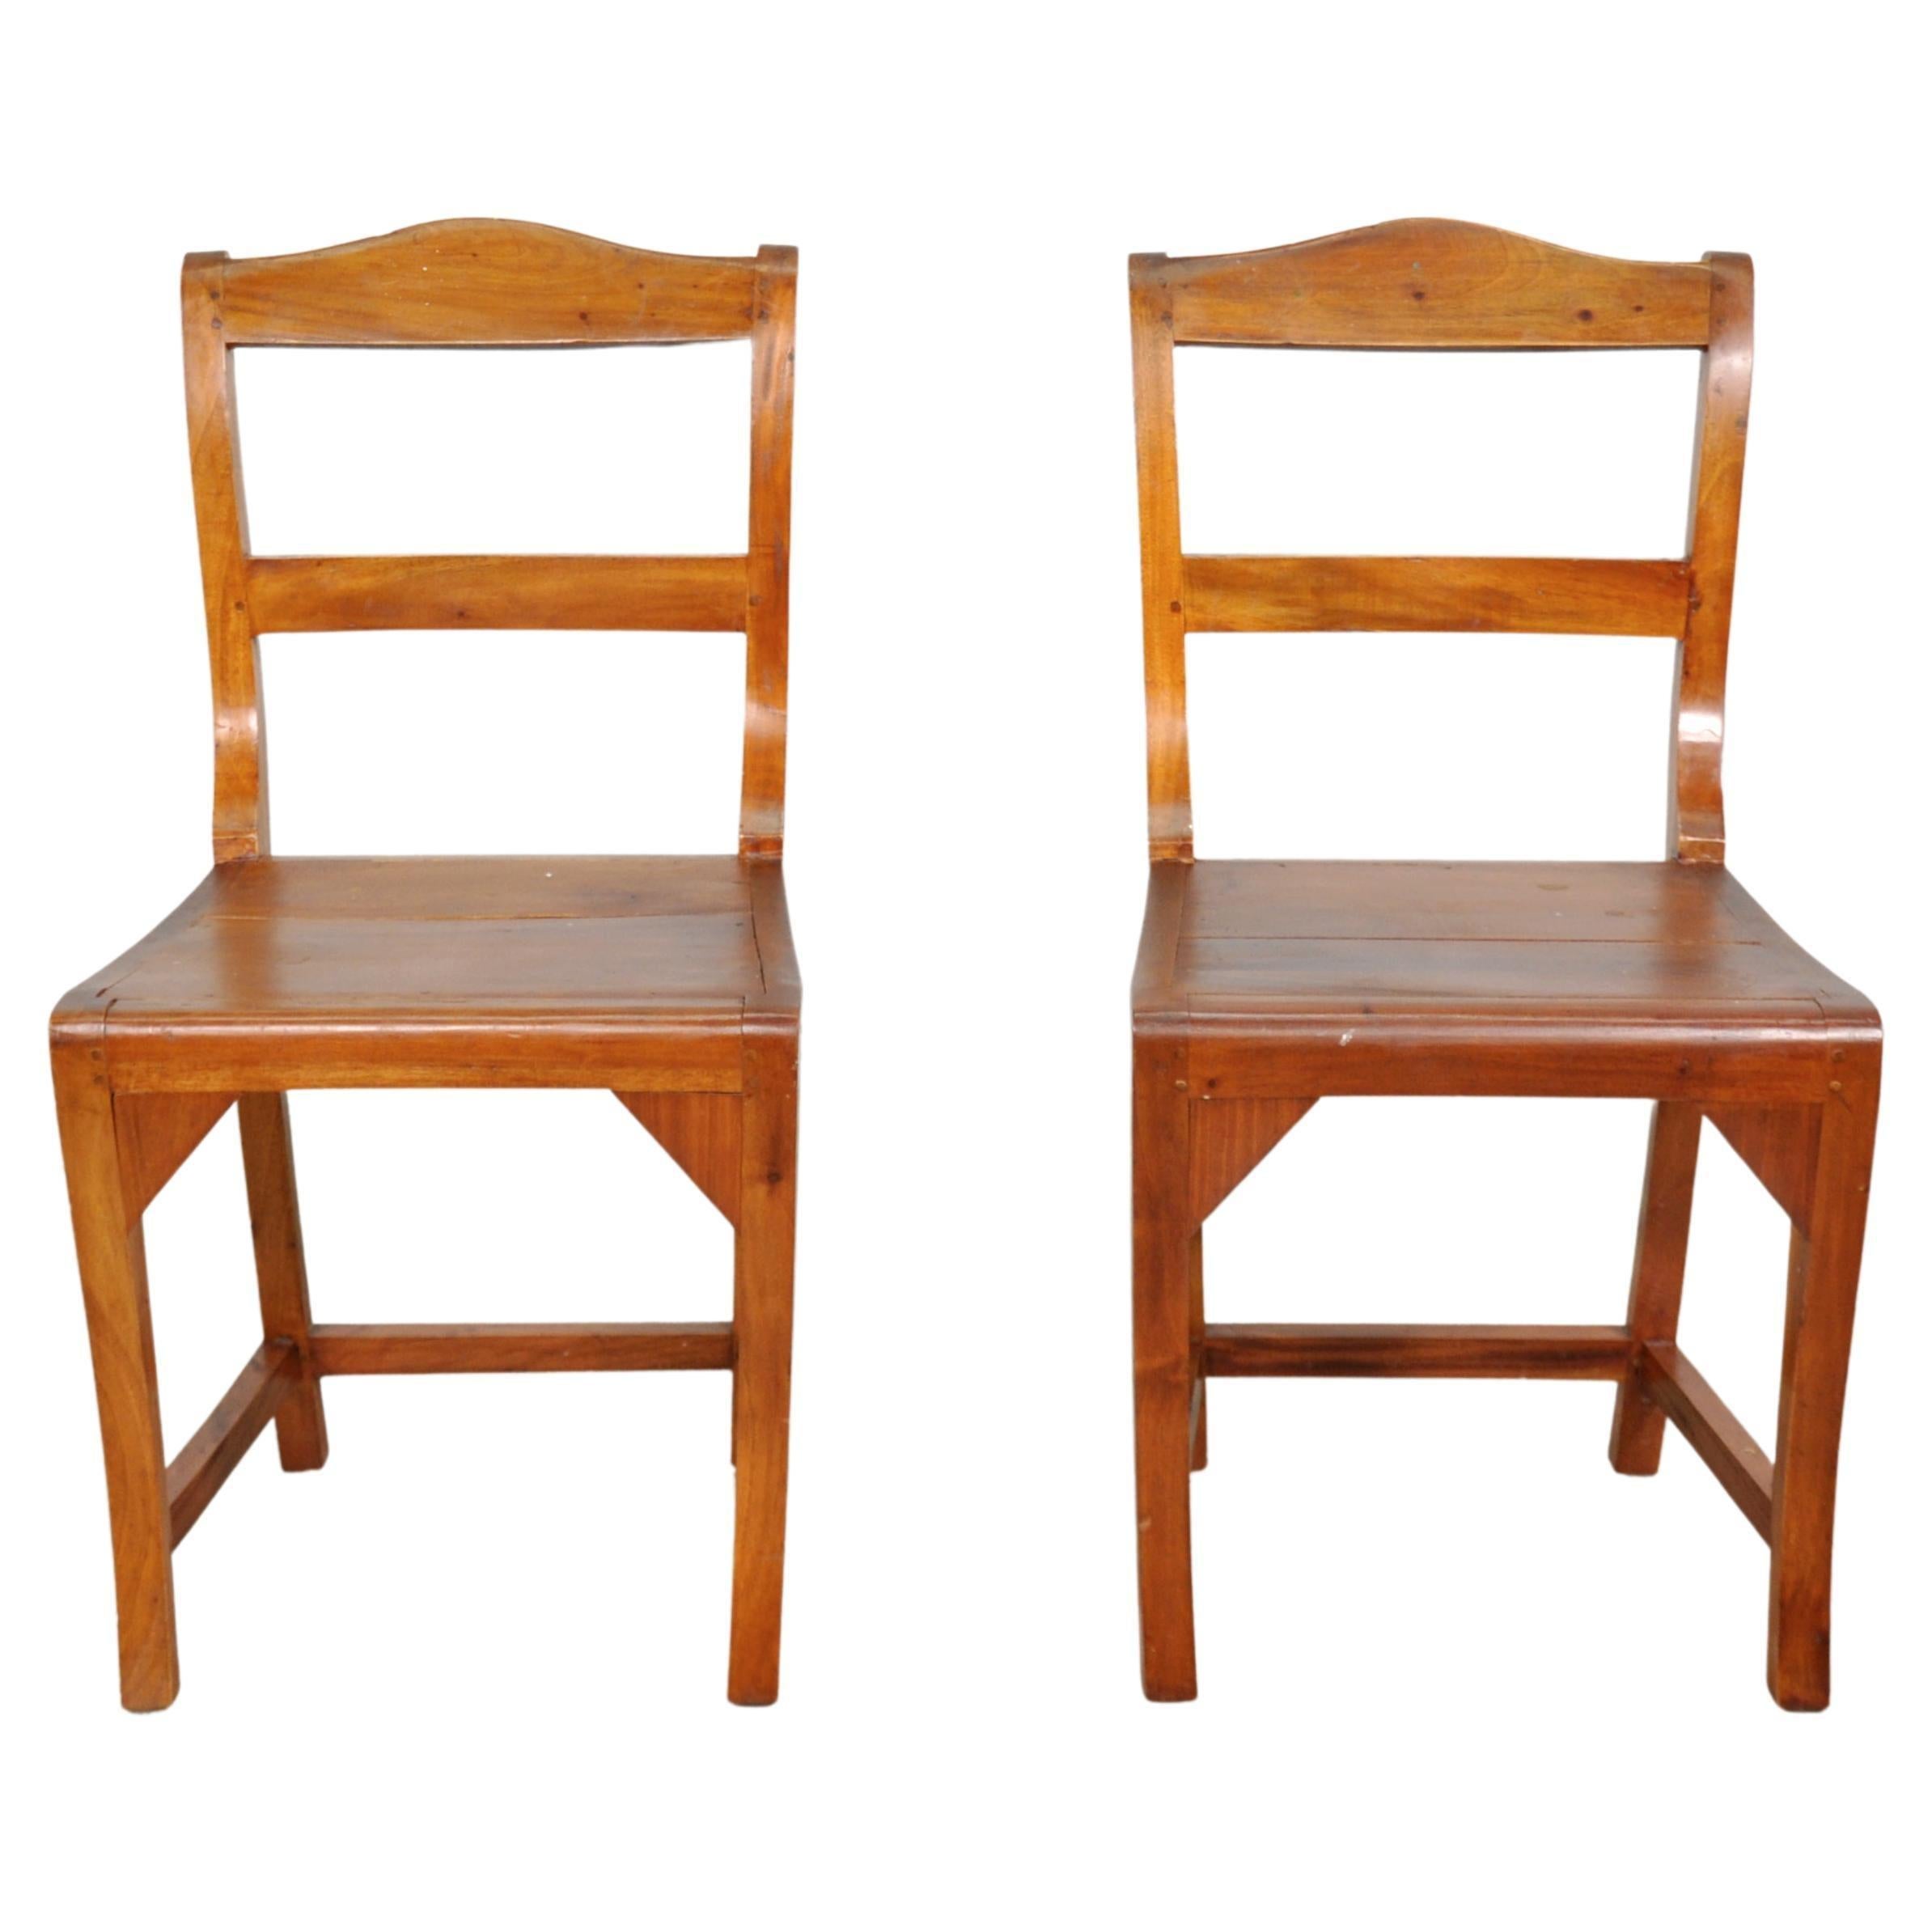 French Country Rustic Side Chairs - a Pair In Good Condition For Sale In Miami, FL